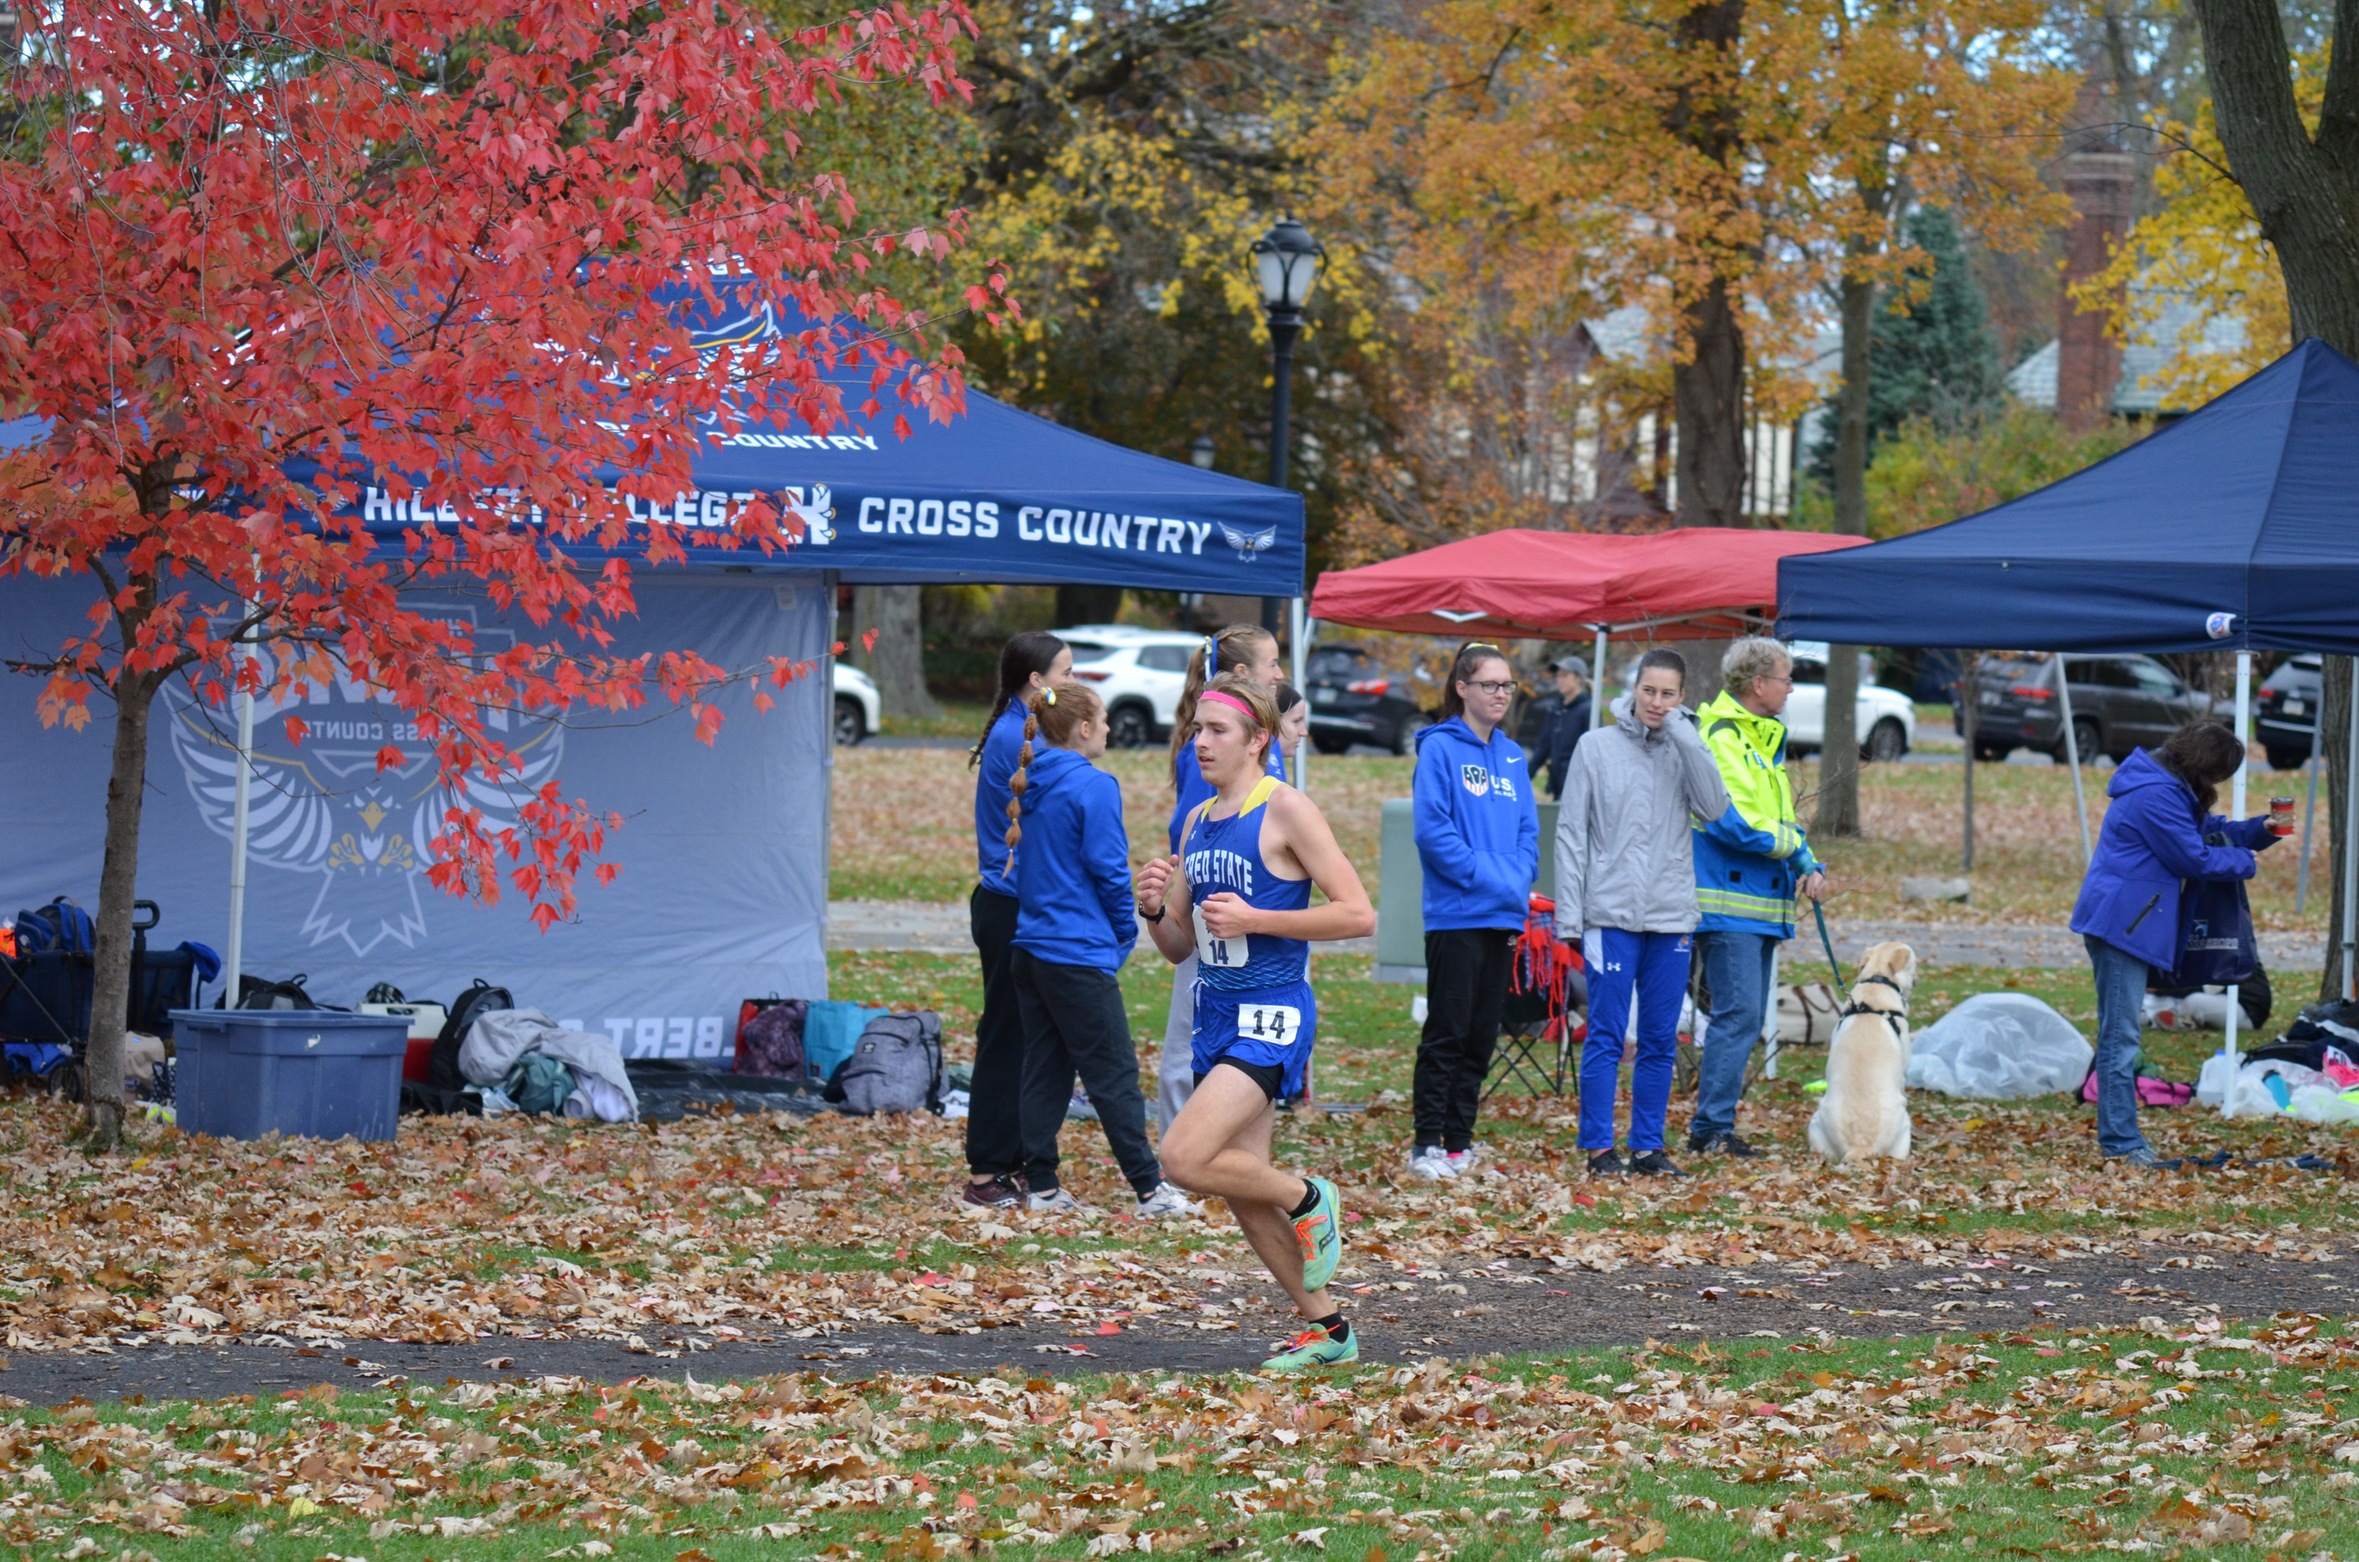 Pioneers Place Season In The AMCC Championship Race